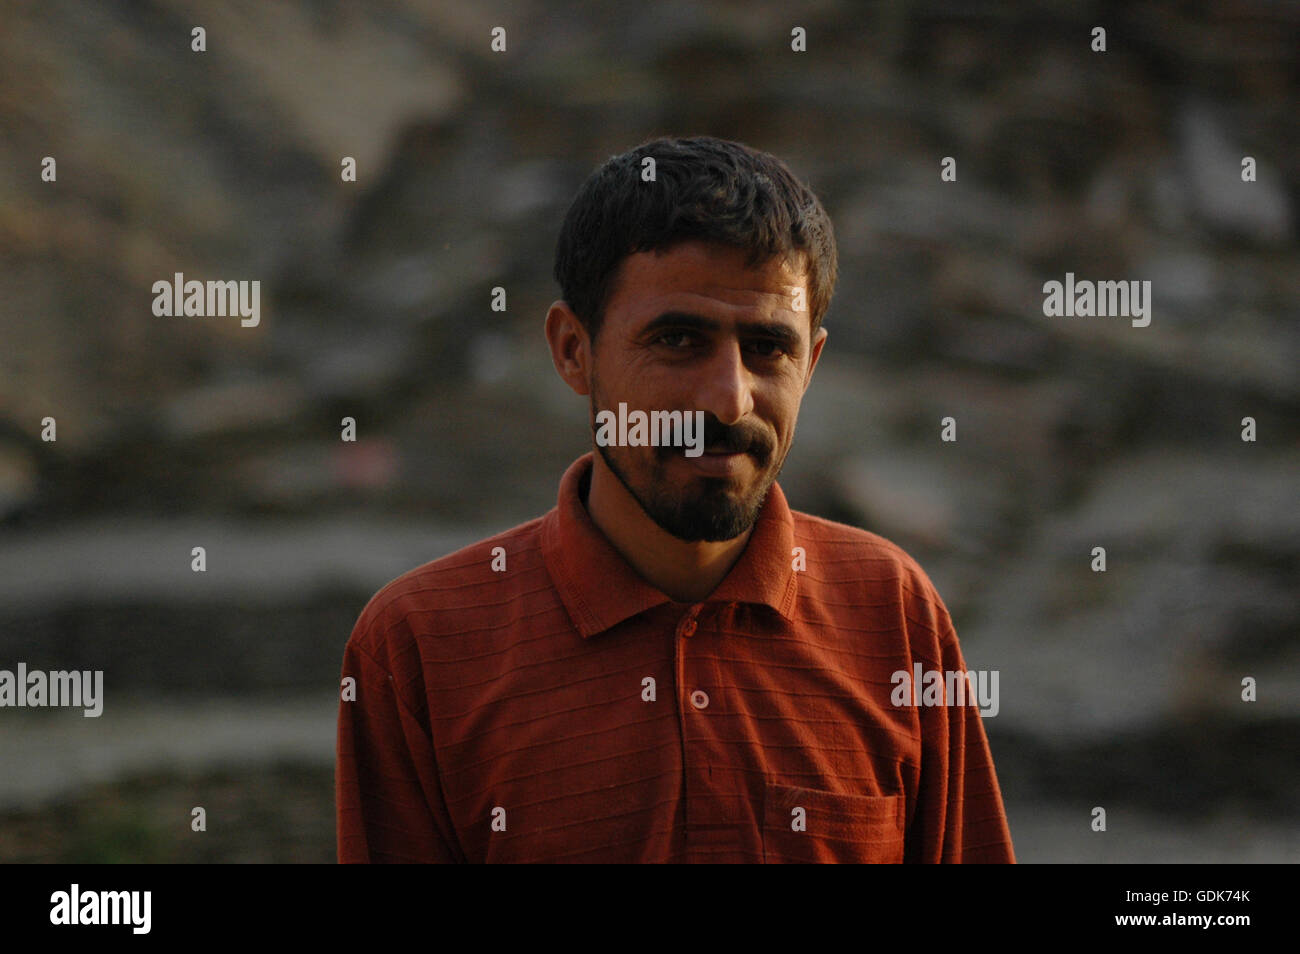 Ahmad, a laborer working on a farm in Al-Yann Wadi 4 hours outside of Abha. Ahmad crossed the border from Yemen illegally and will move from farm to farm over the next few years before leaving back to Yemen. Stock Photo